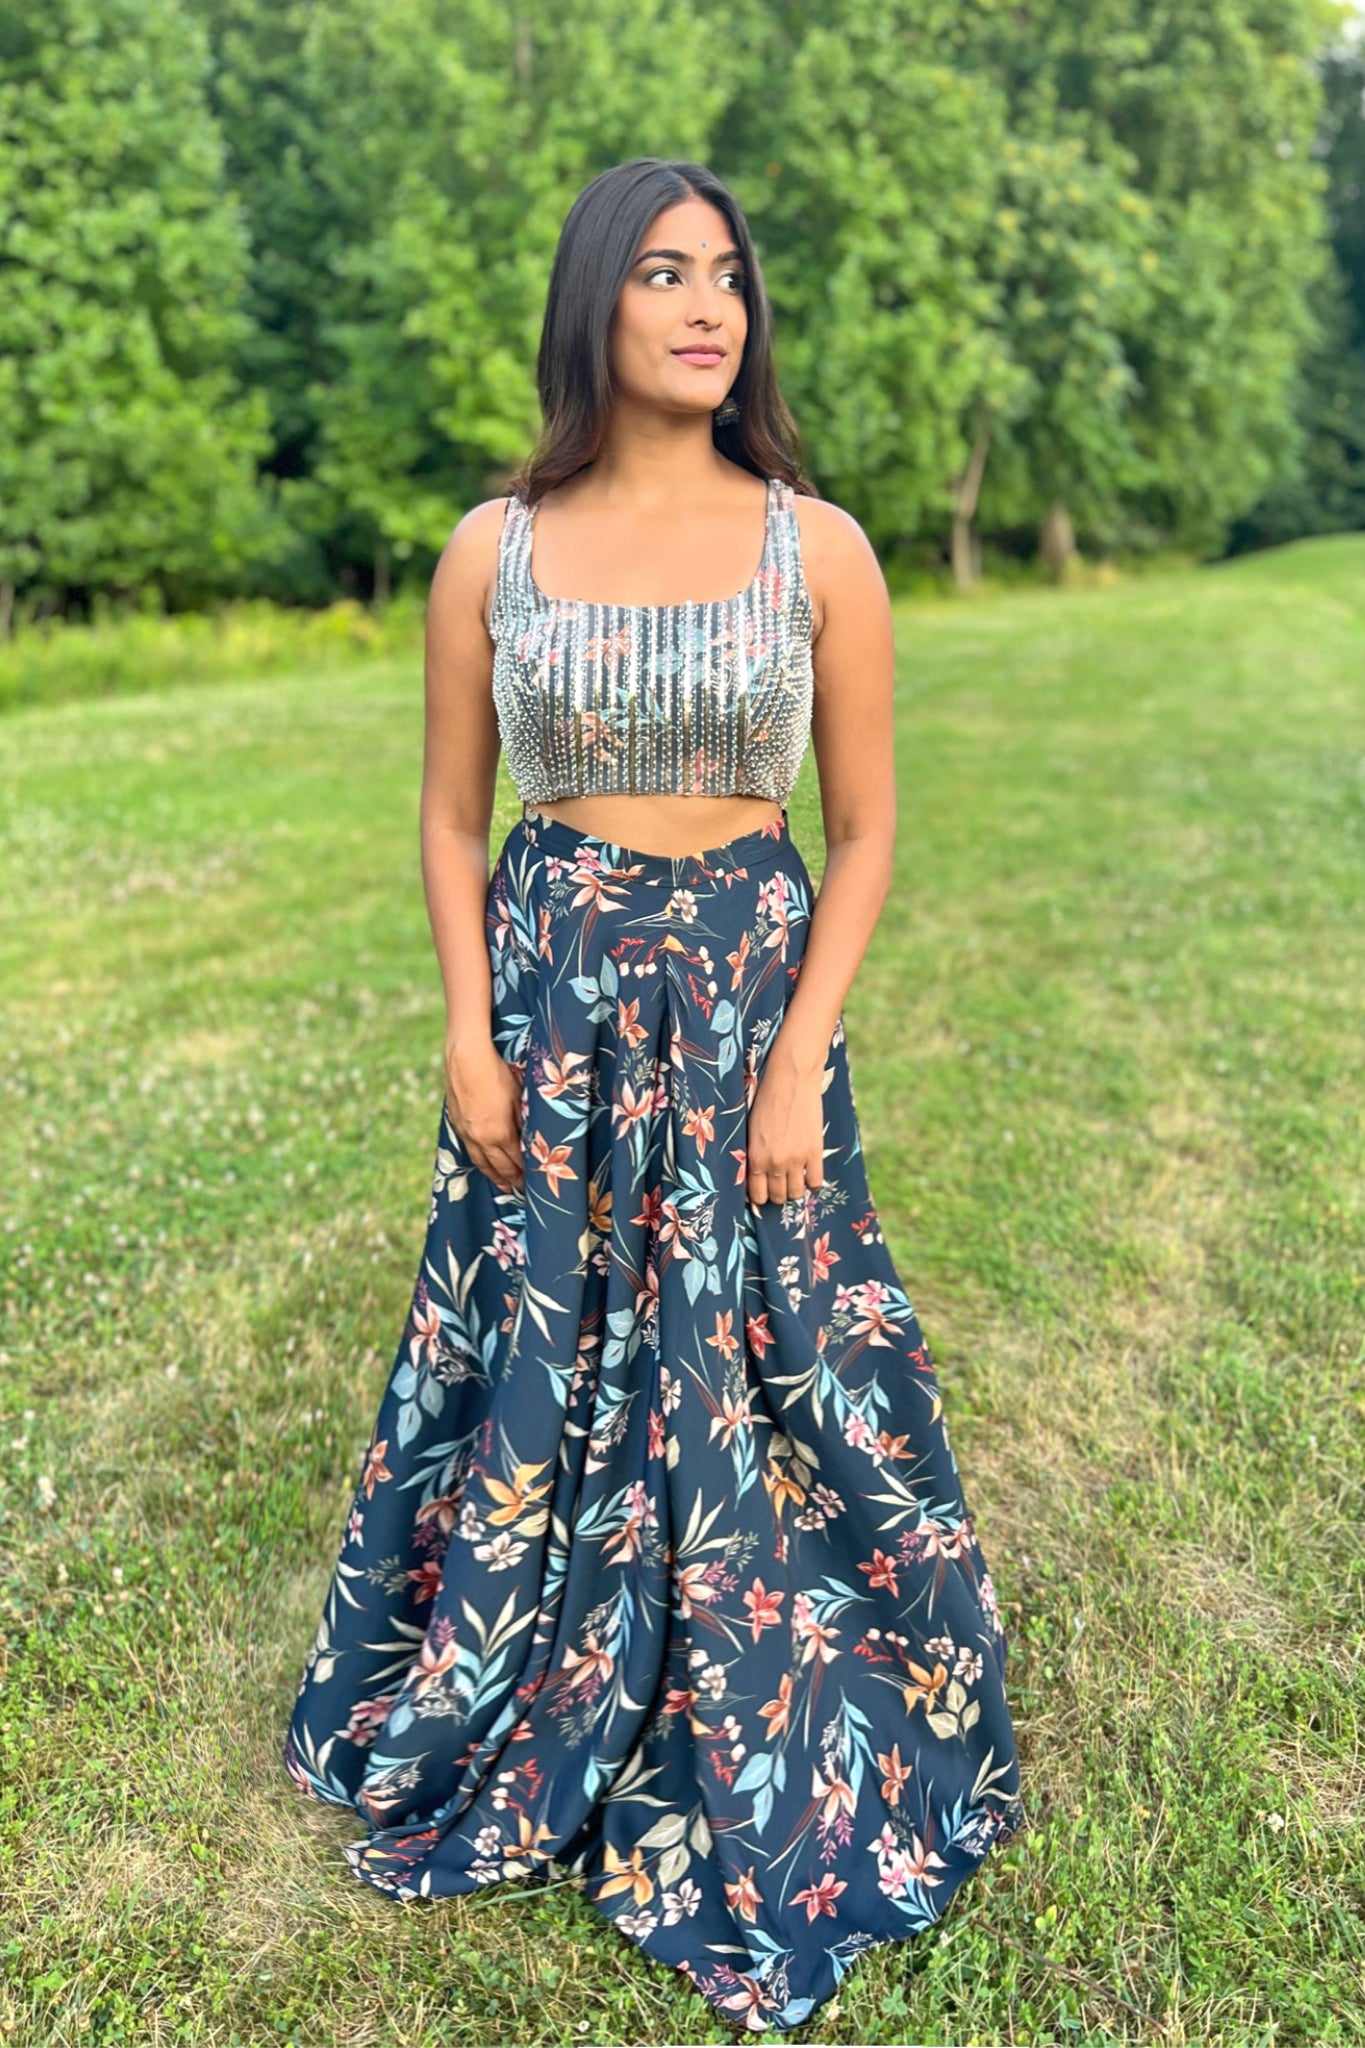 The sequin crop top with long skirt